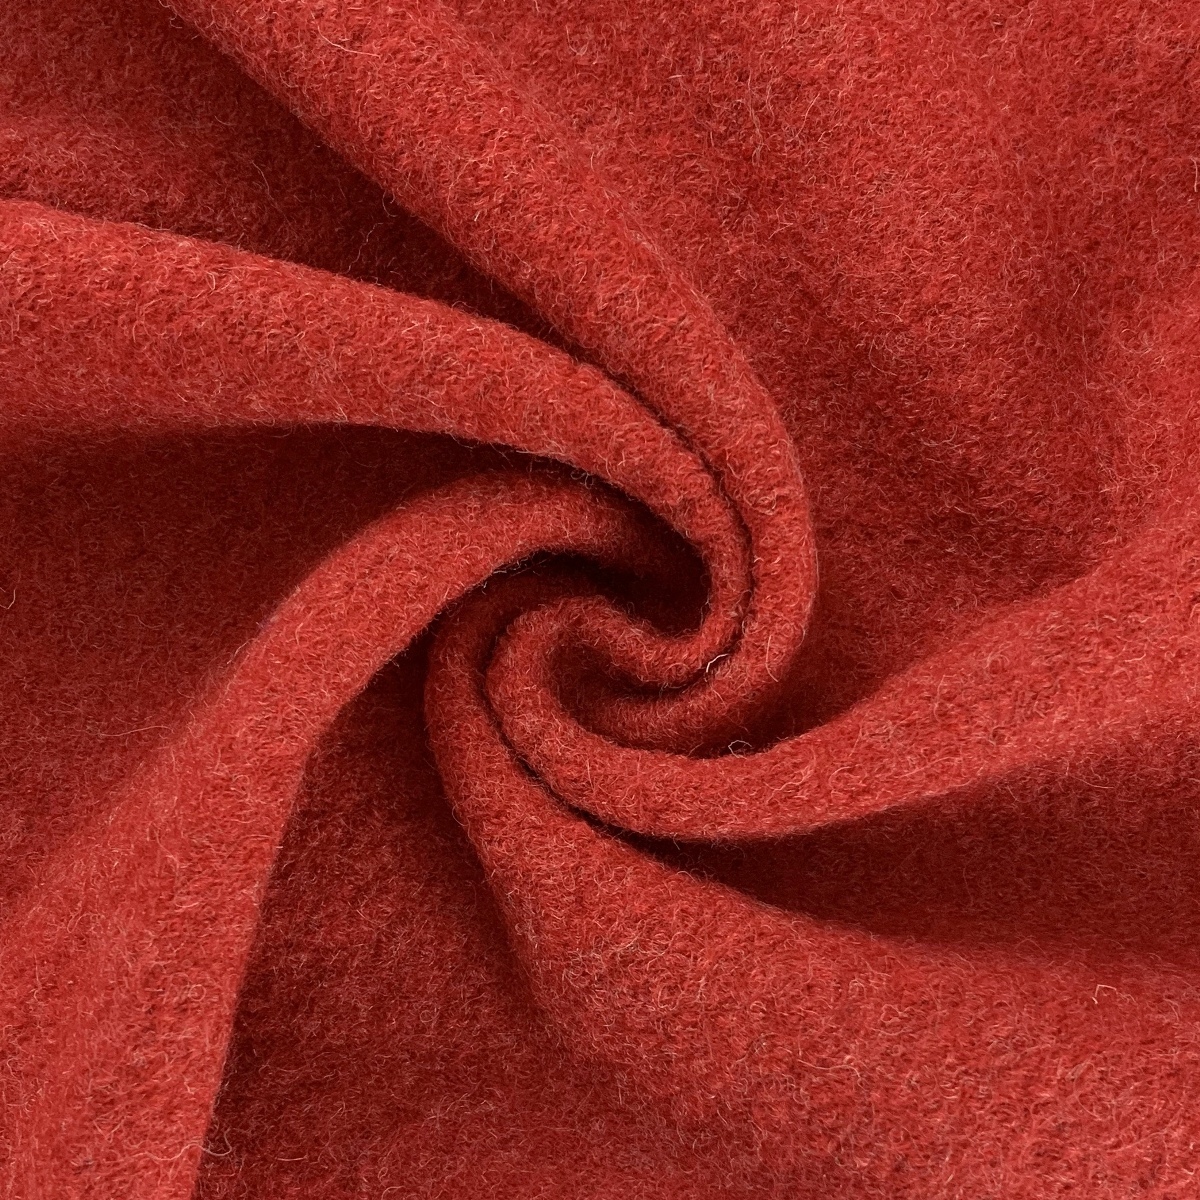 Pure Luxury 100% Boiled Wool Jacket and Coat Fabric - Red